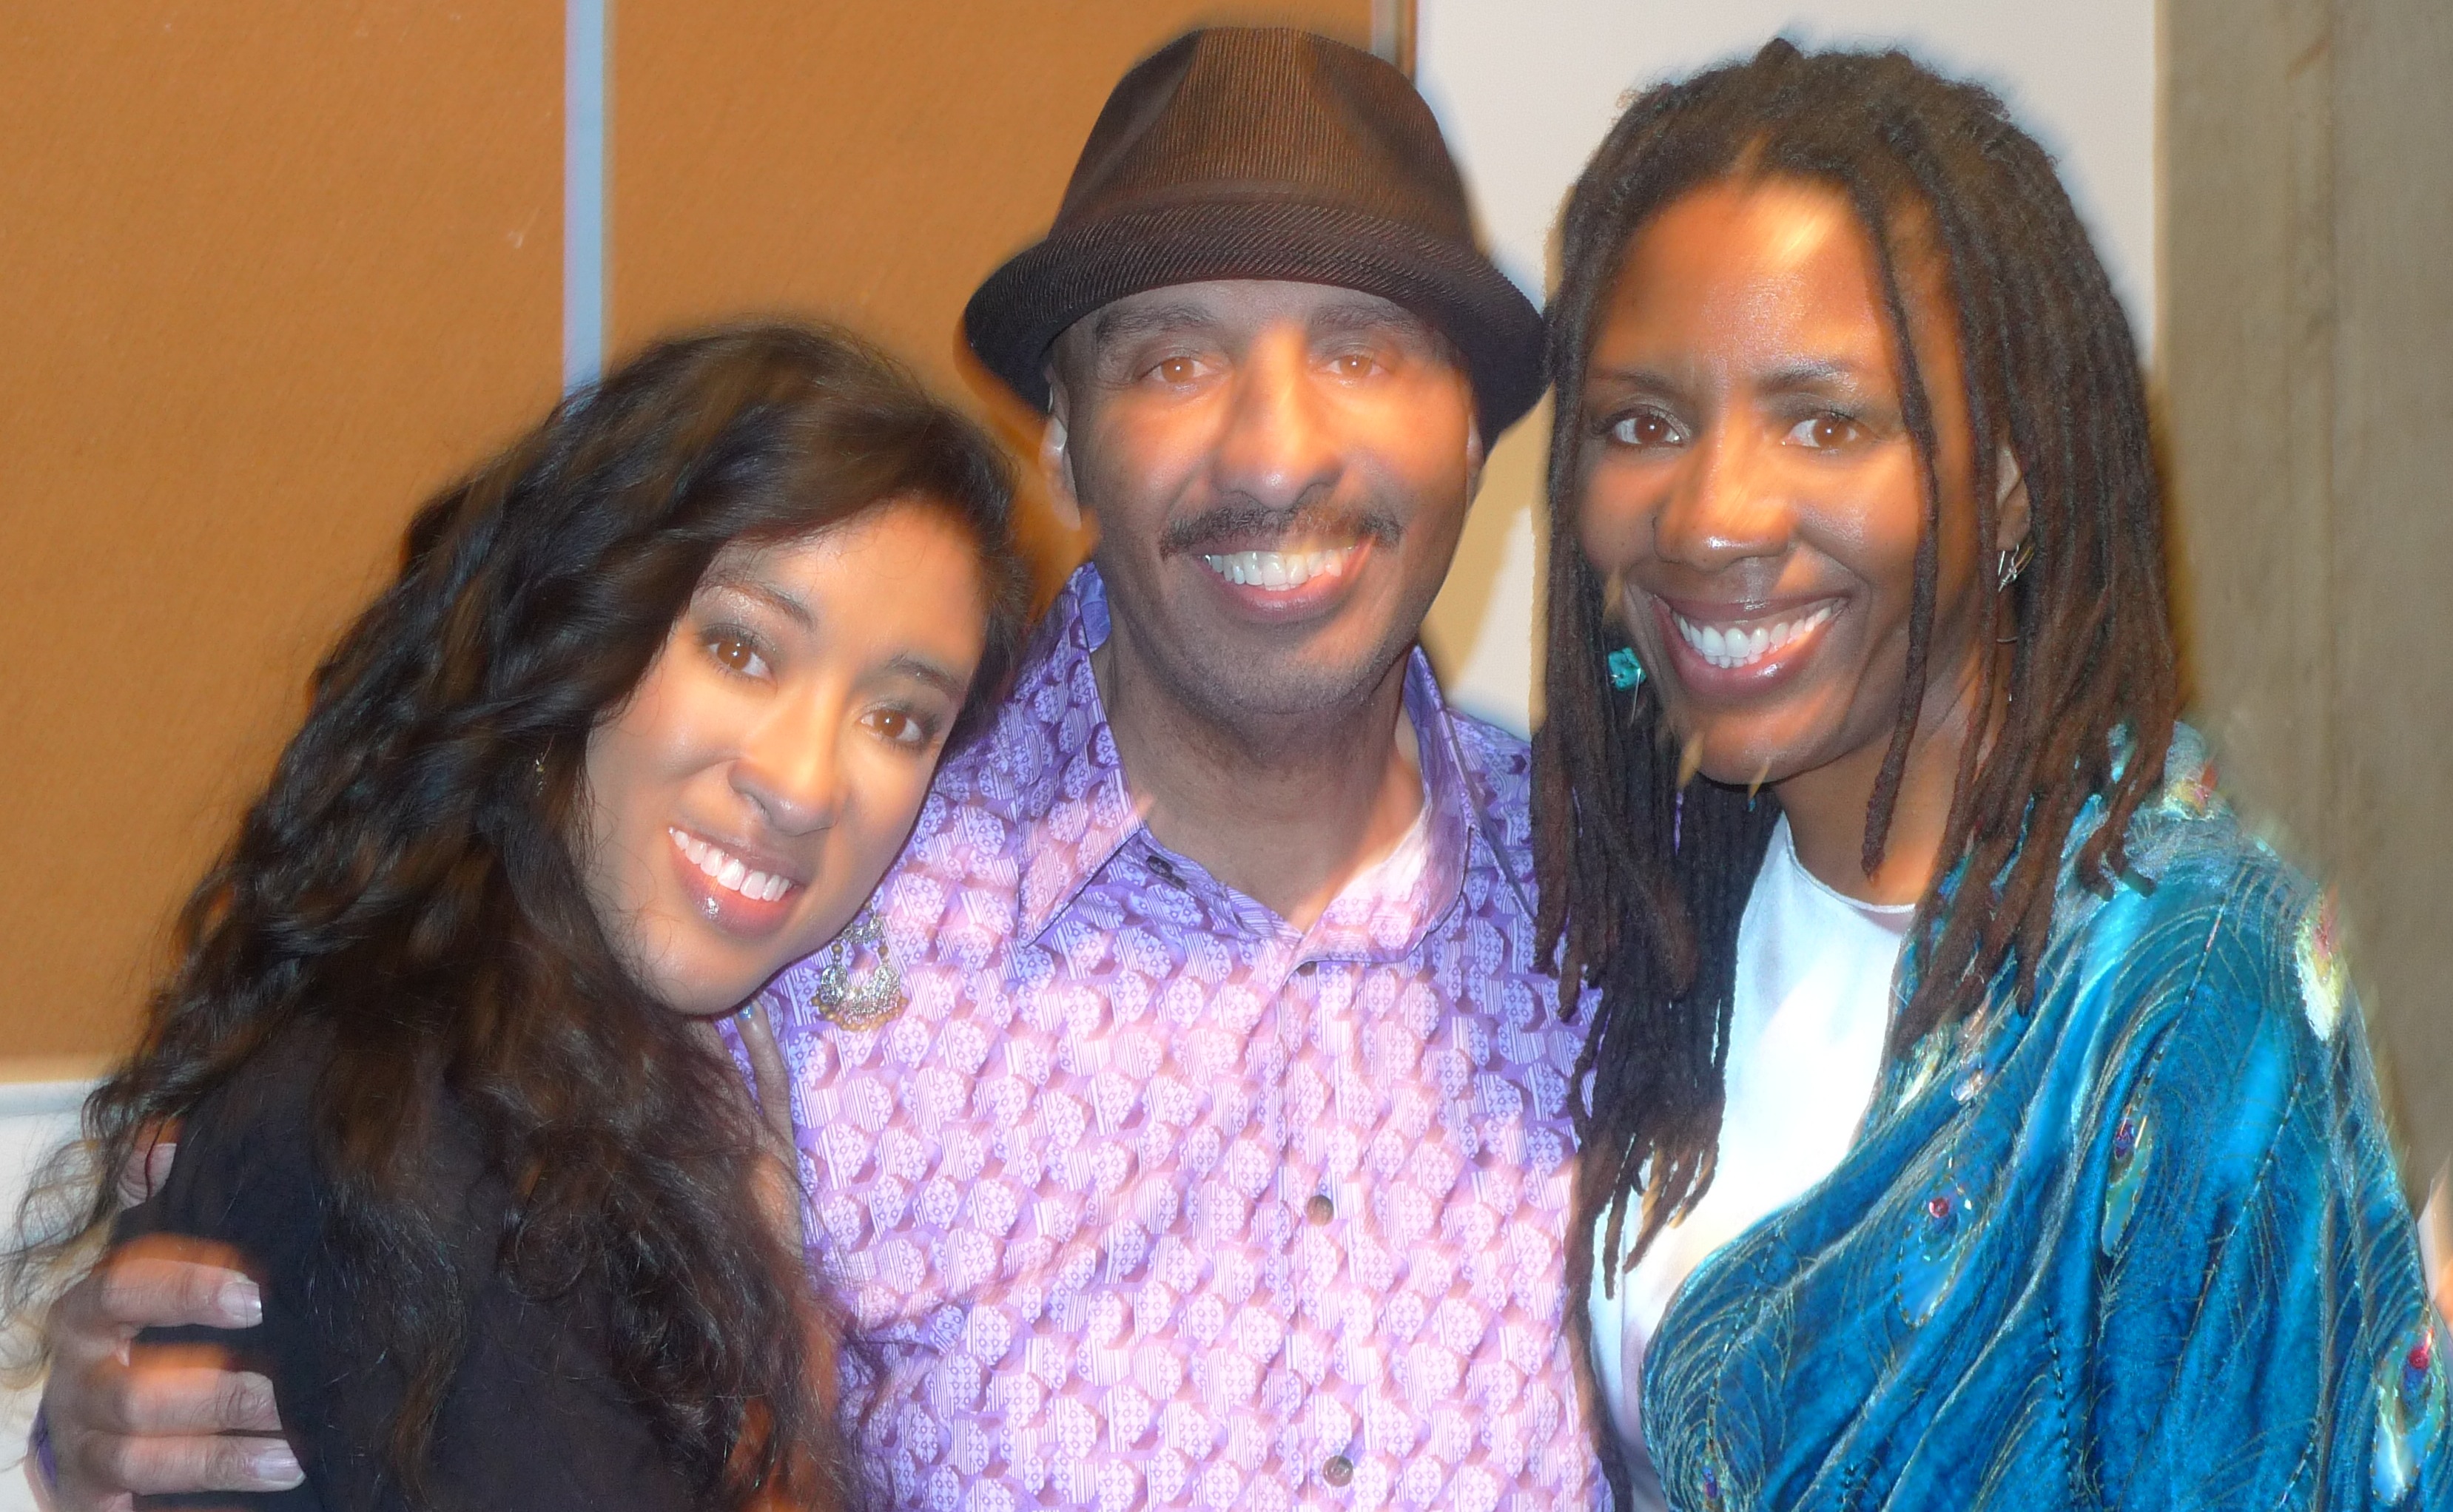 American Actor B.T. Taylor At cast party for Voice of the unheard With #American singers #Nadia Christine Duggin and #Nailah Porter